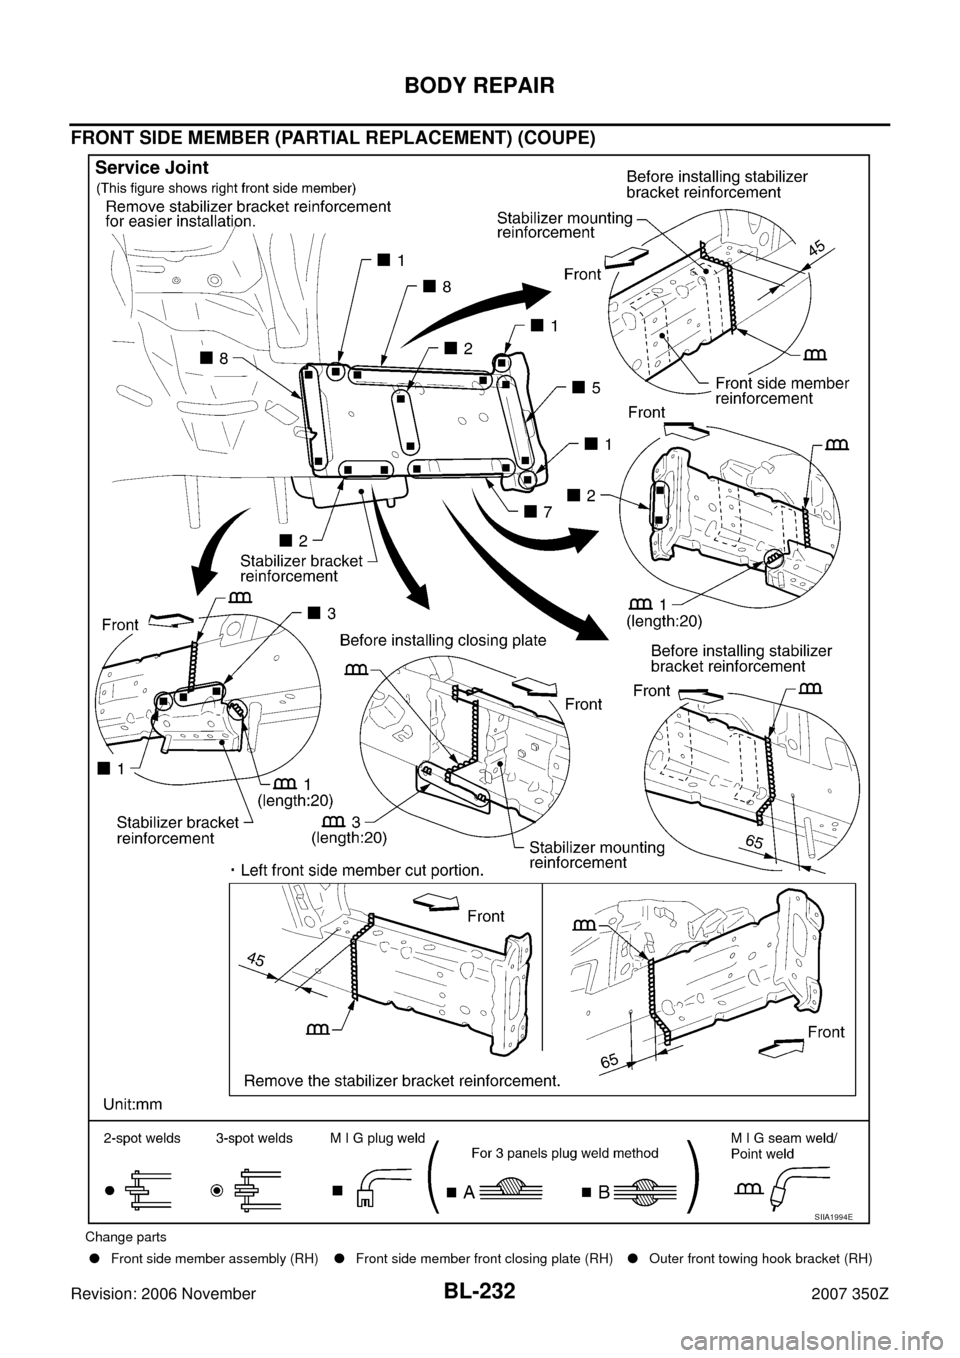 NISSAN 350Z 2007 Z33 Body, Lock And Security System Workshop Manual BL-232
BODY REPAIR
Revision: 2006 November2007 350Z
FRONT SIDE MEMBER (PARTIAL REPLACEMENT) (COUPE)
Change parts
Front side member assembly (RH)Front side member front closing plate (RH)Outer front